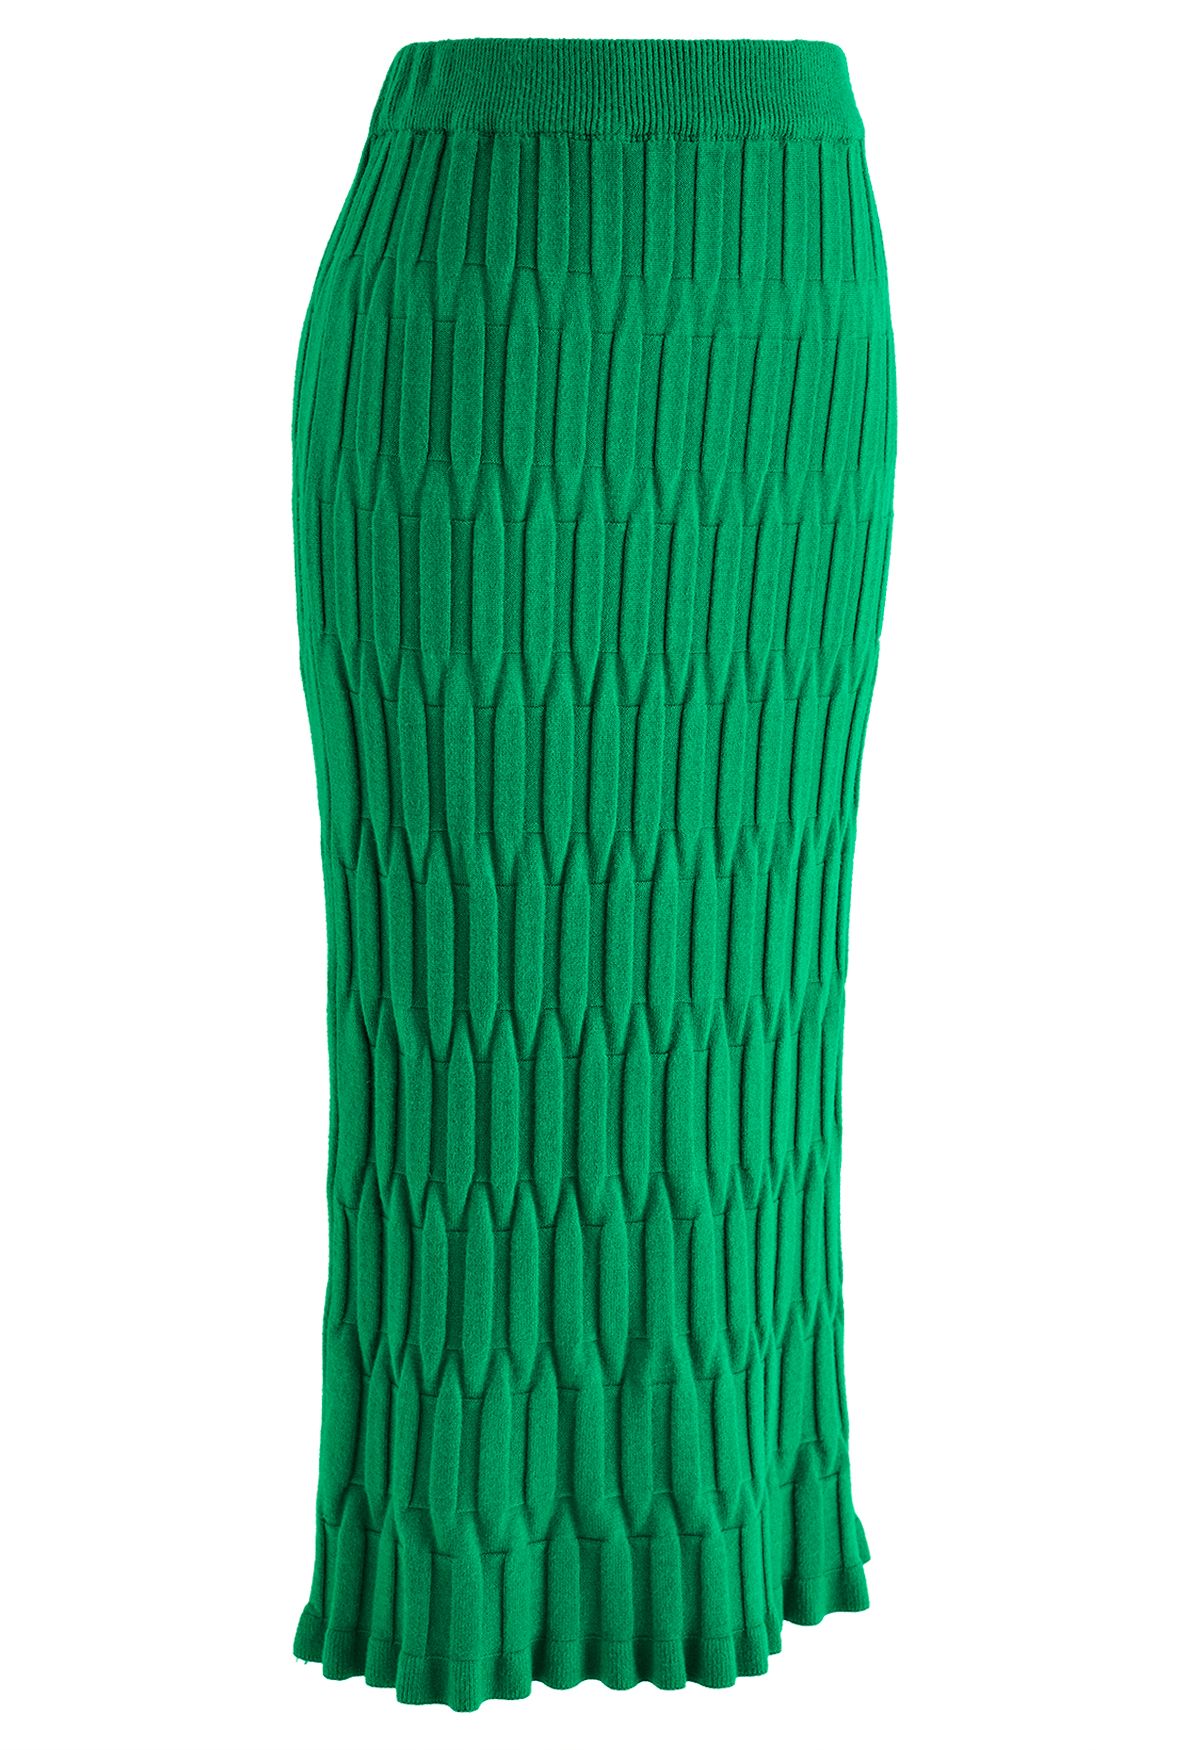 Embossed Texture Knit Pencil Skirt in Green - Retro, Indie and Unique ...